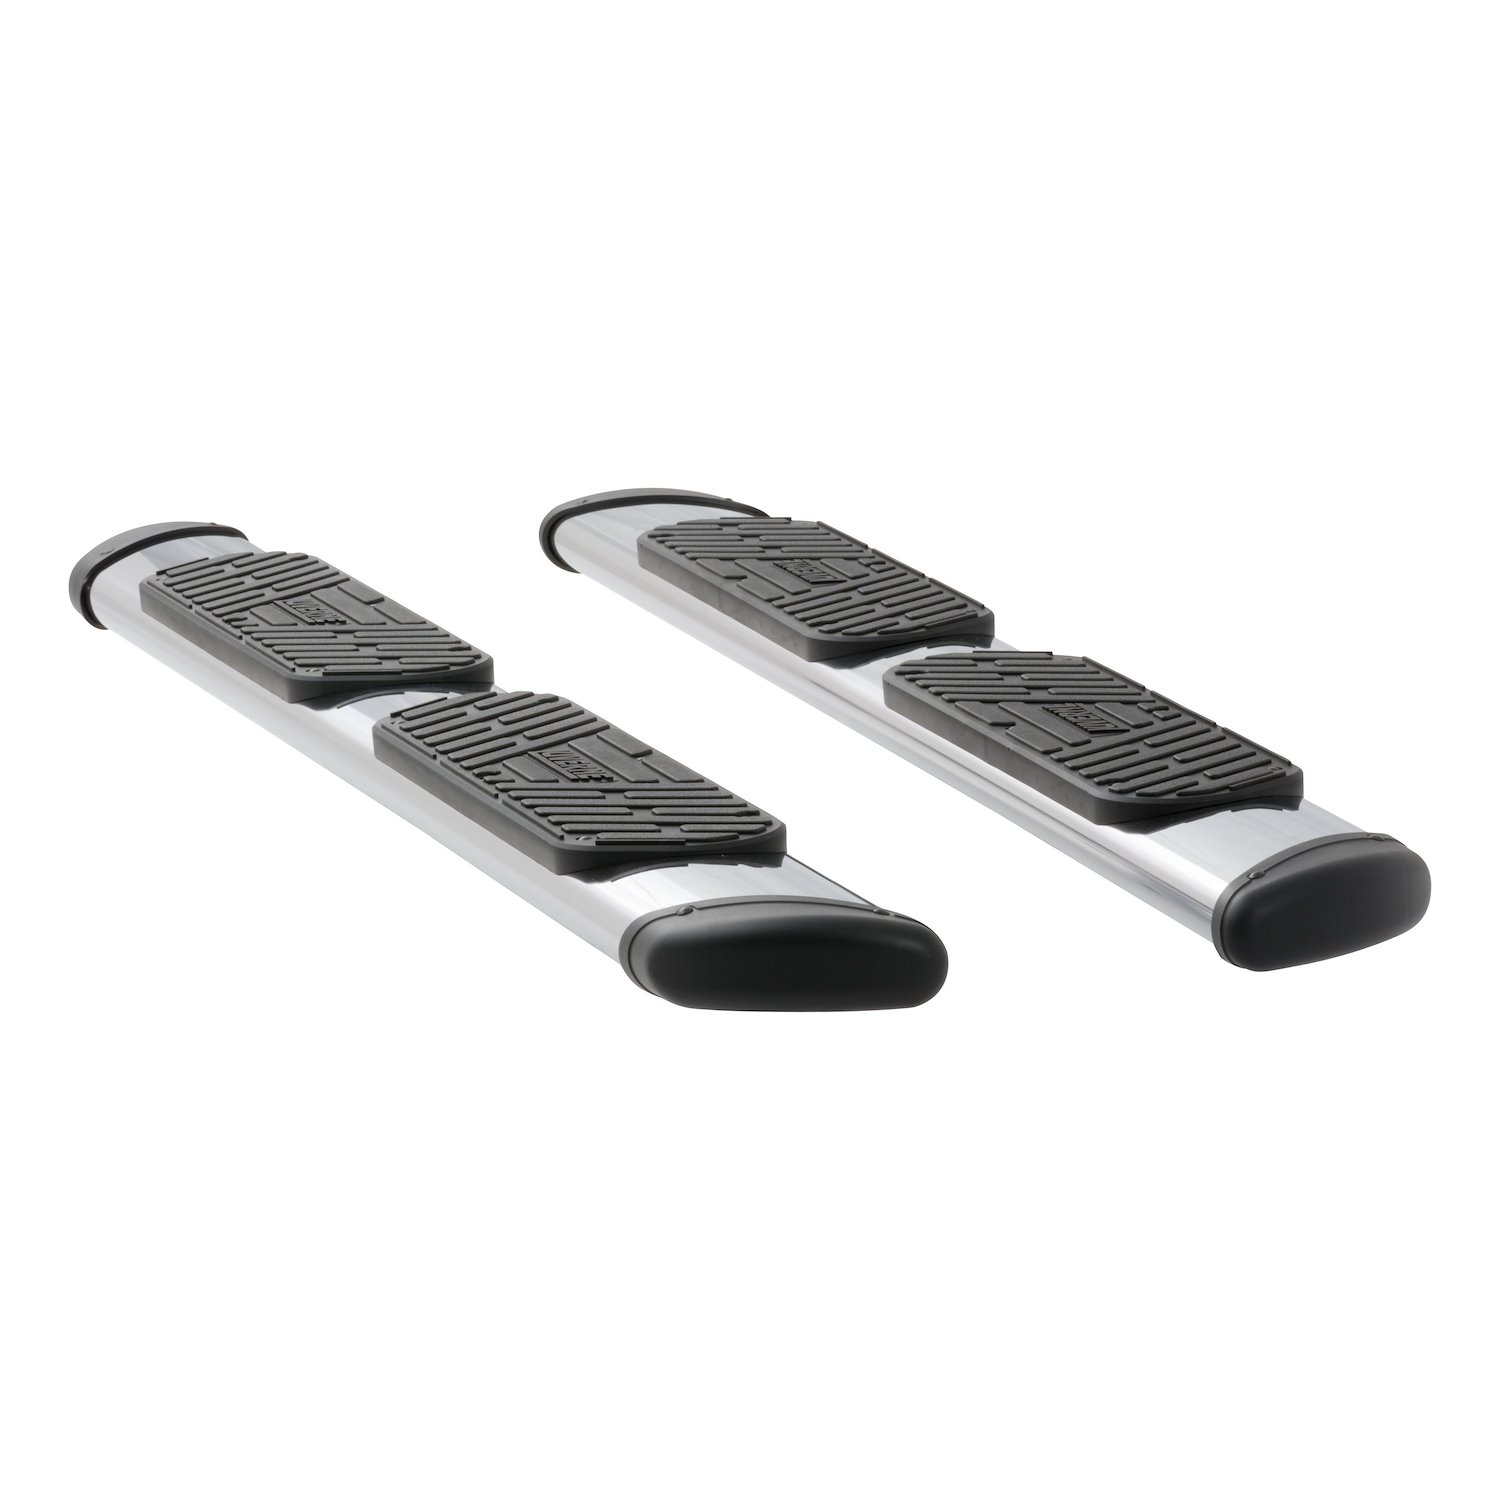 477078-401723 Regal 7 Polished Stainless 78 in. Oval Side Steps Fits Select Ford F250 to F550